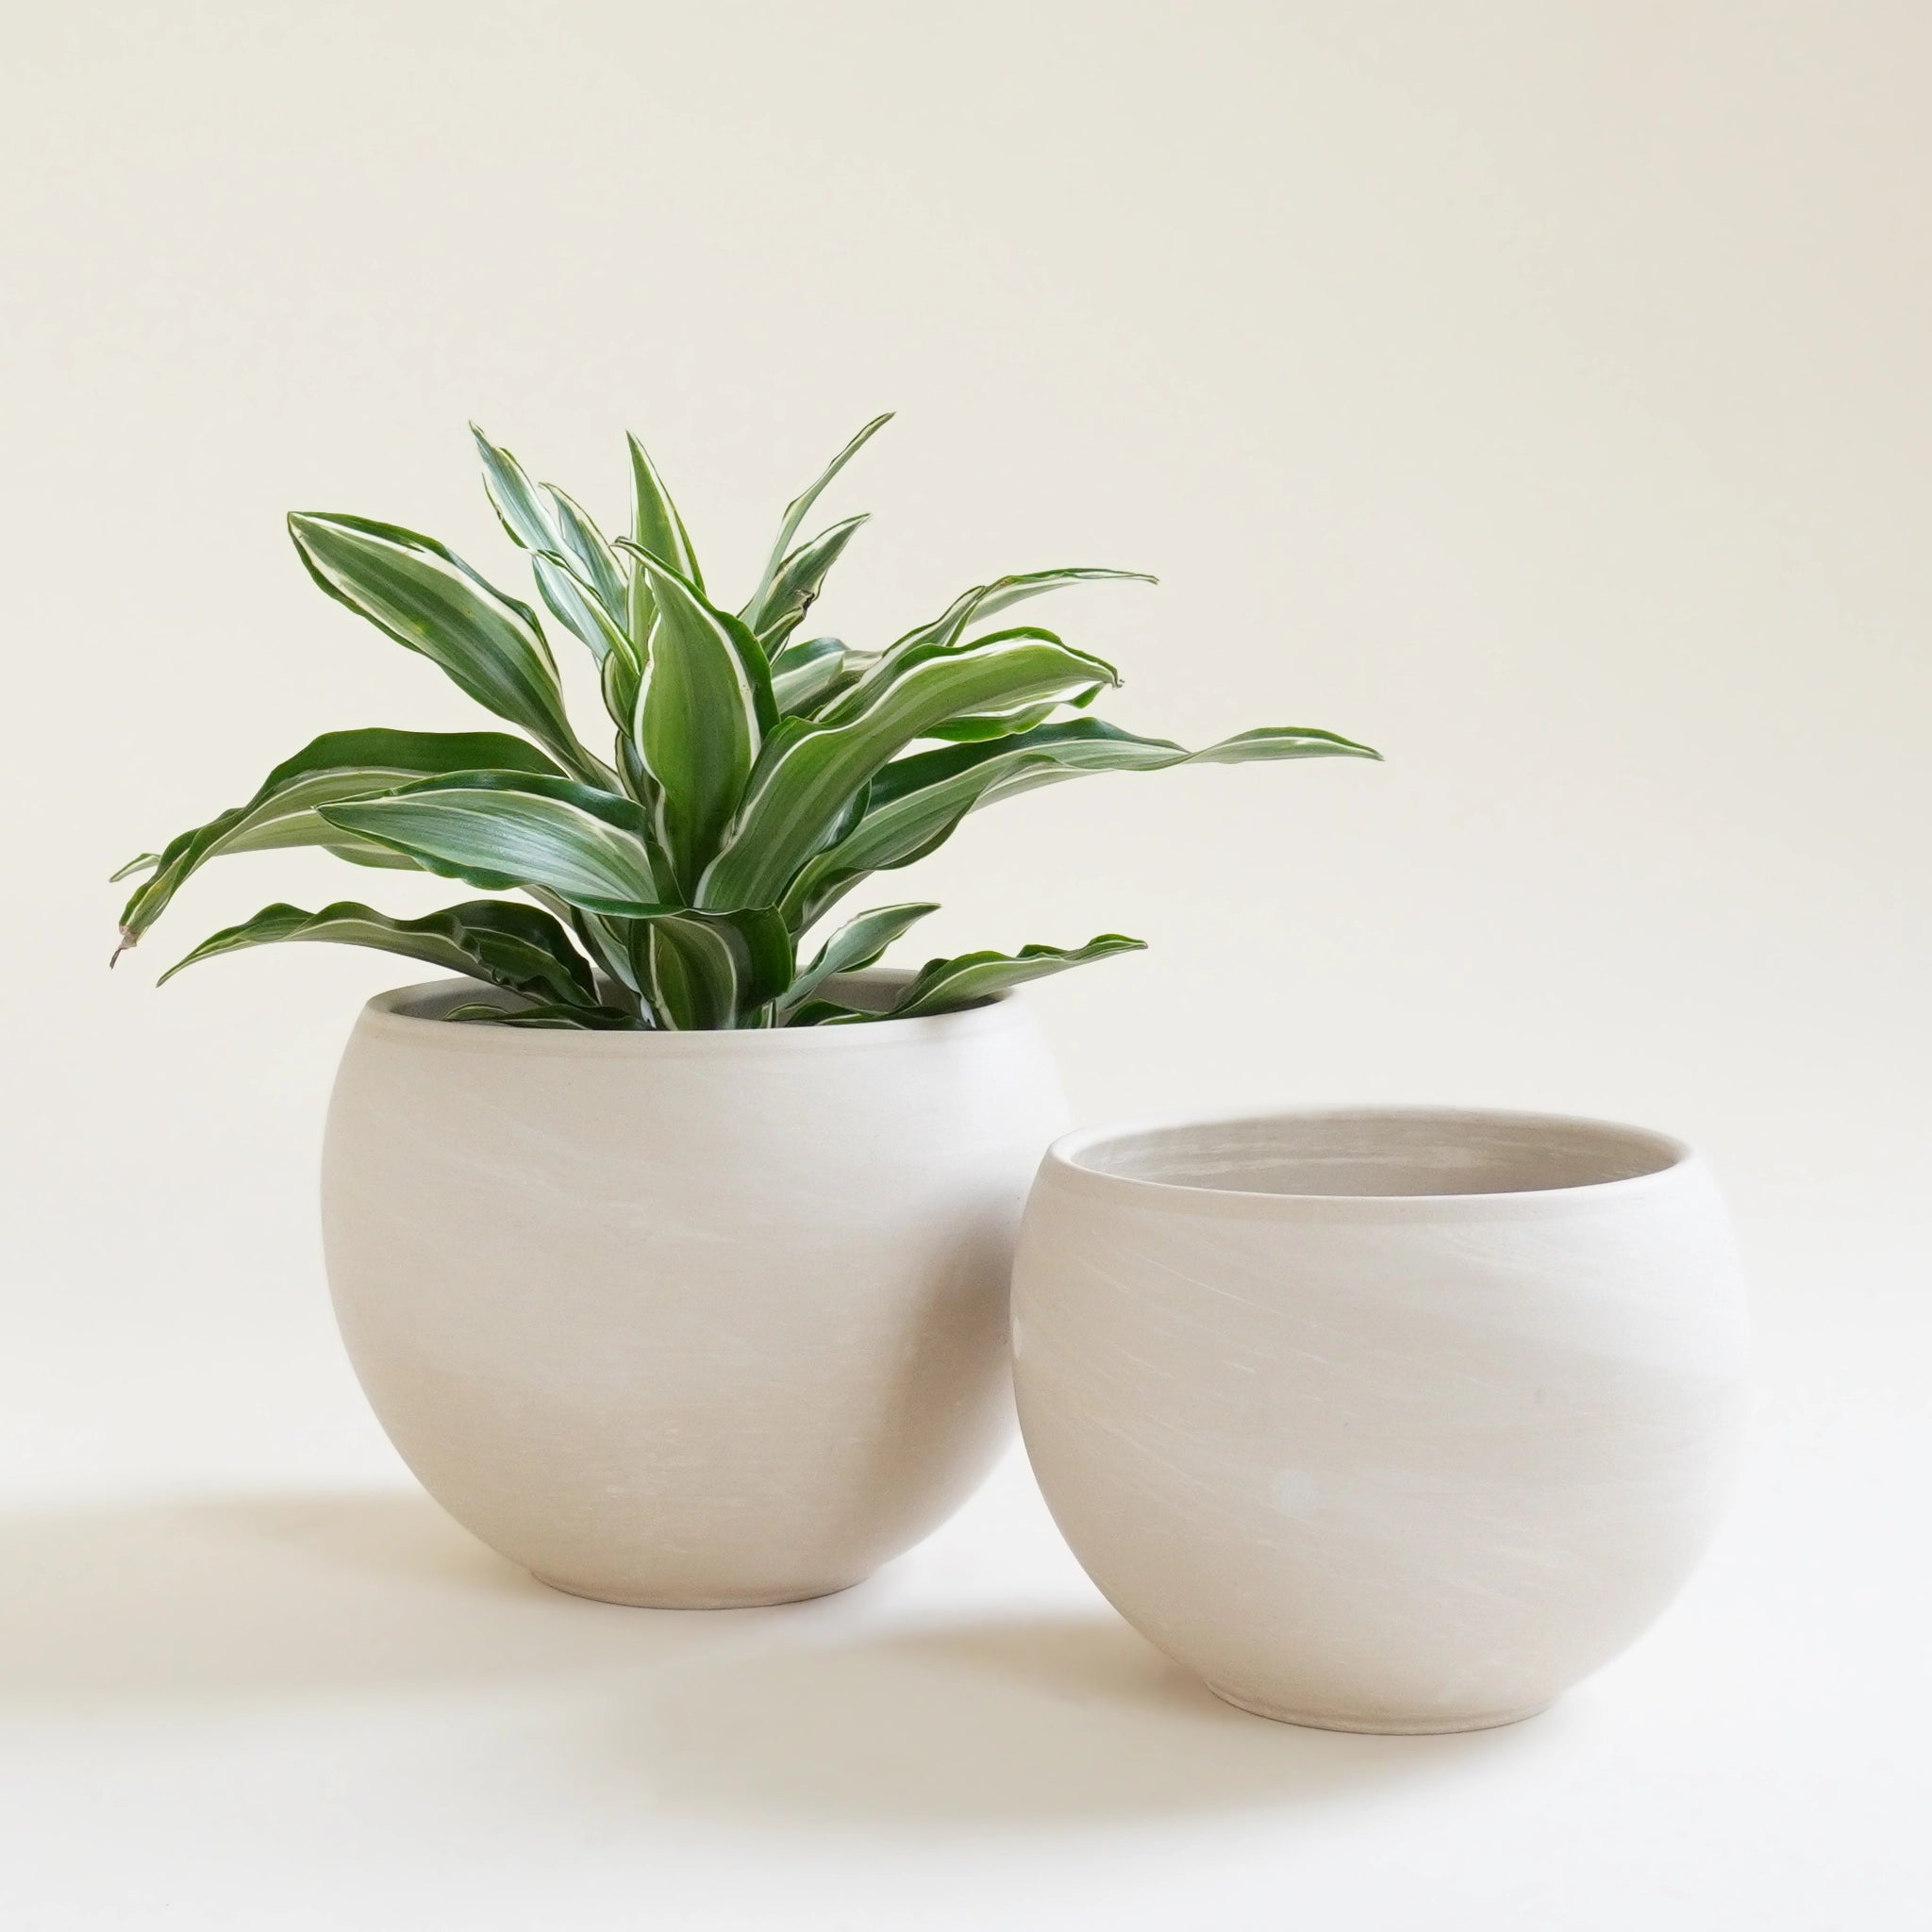 Two round tall bowl shaped beige colored pots, one is slightly larger than the other, and one is holding a leafy house plant with dark and light green striped long leaves.